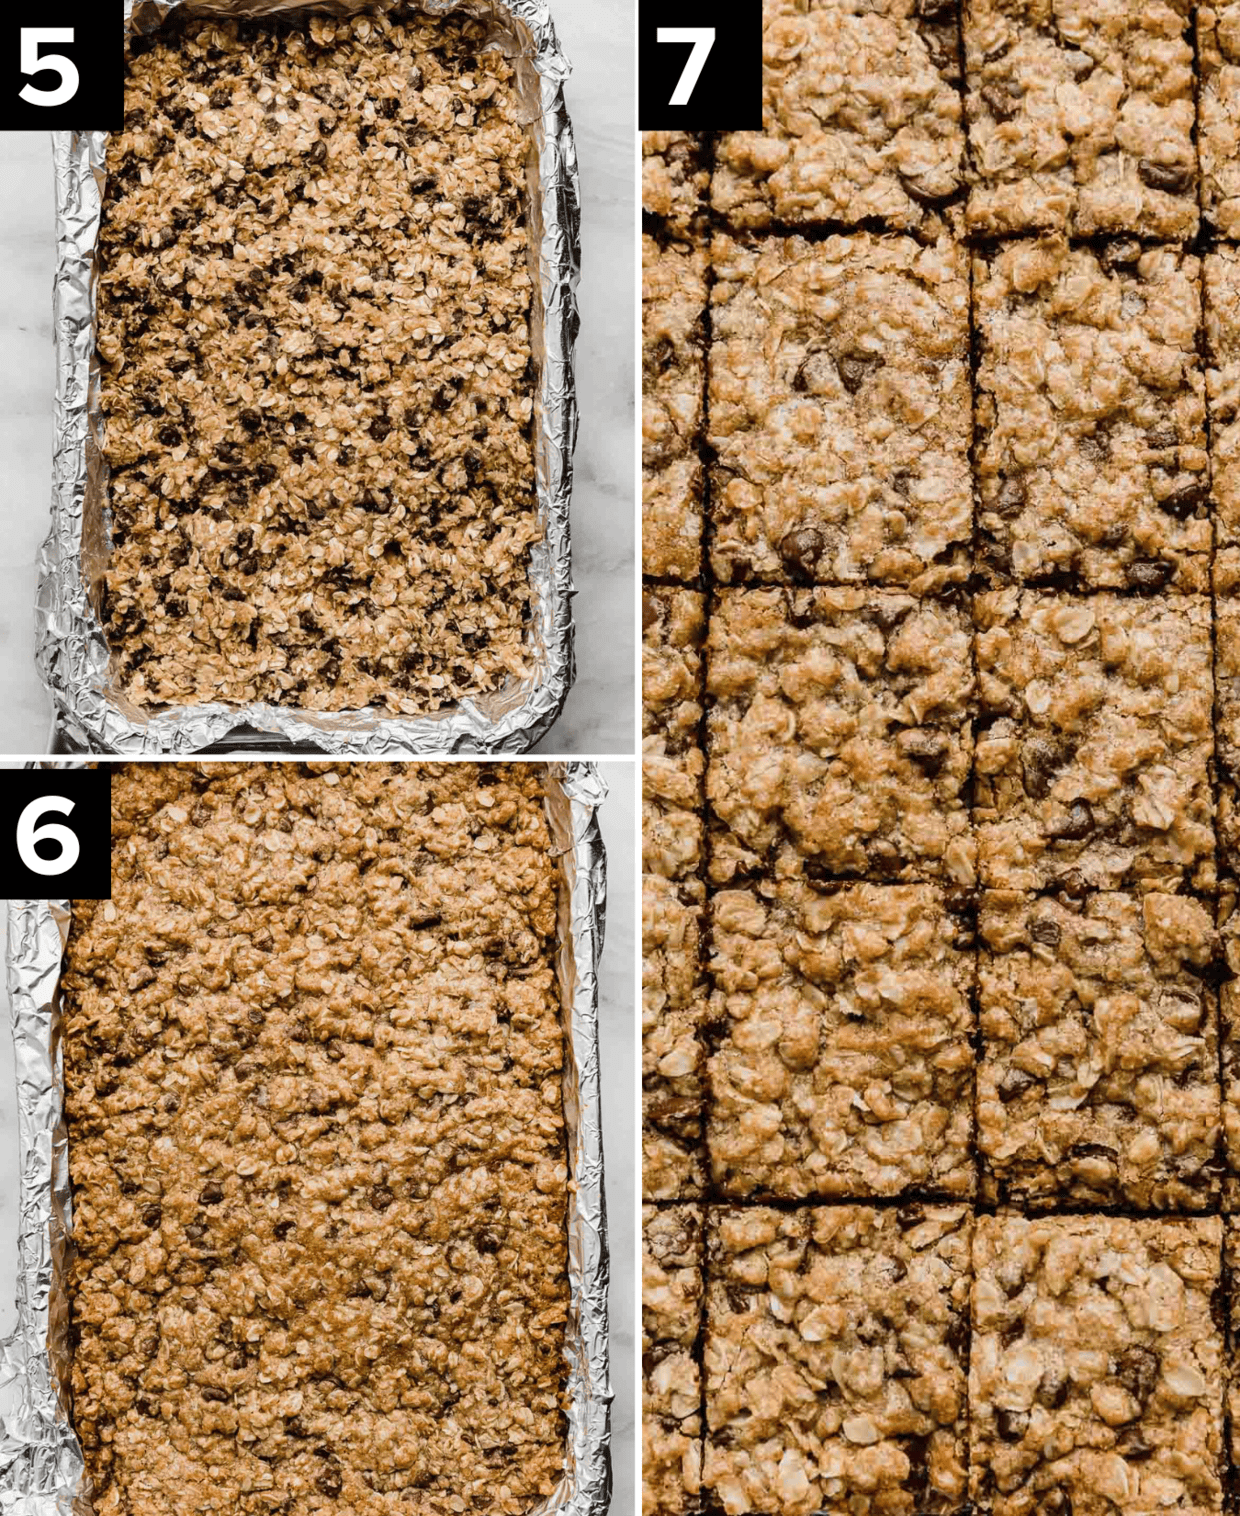 Oatmeal chocolate chip cookie bar dough in a rectangular baking dish, then another image showing it baked, and the far right photo has the oatmeal cookie bars cut into squares.